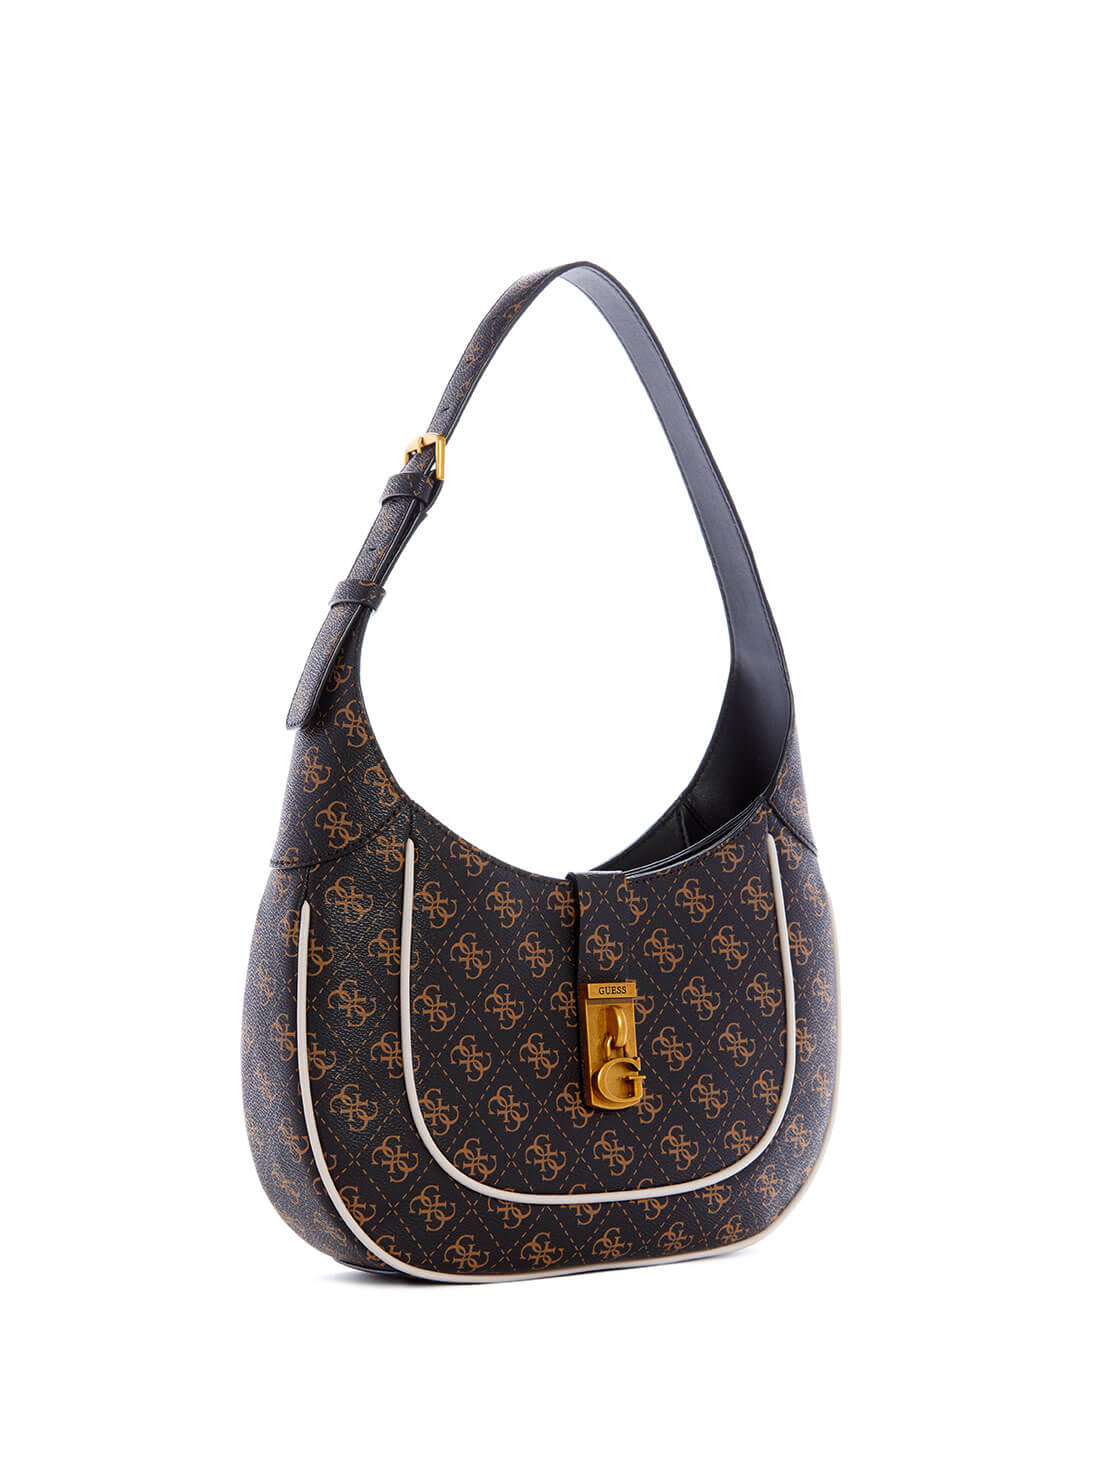 GUESS Womens Black Brown Logo Maimie Hobo Bag SB840902 Front Side  View